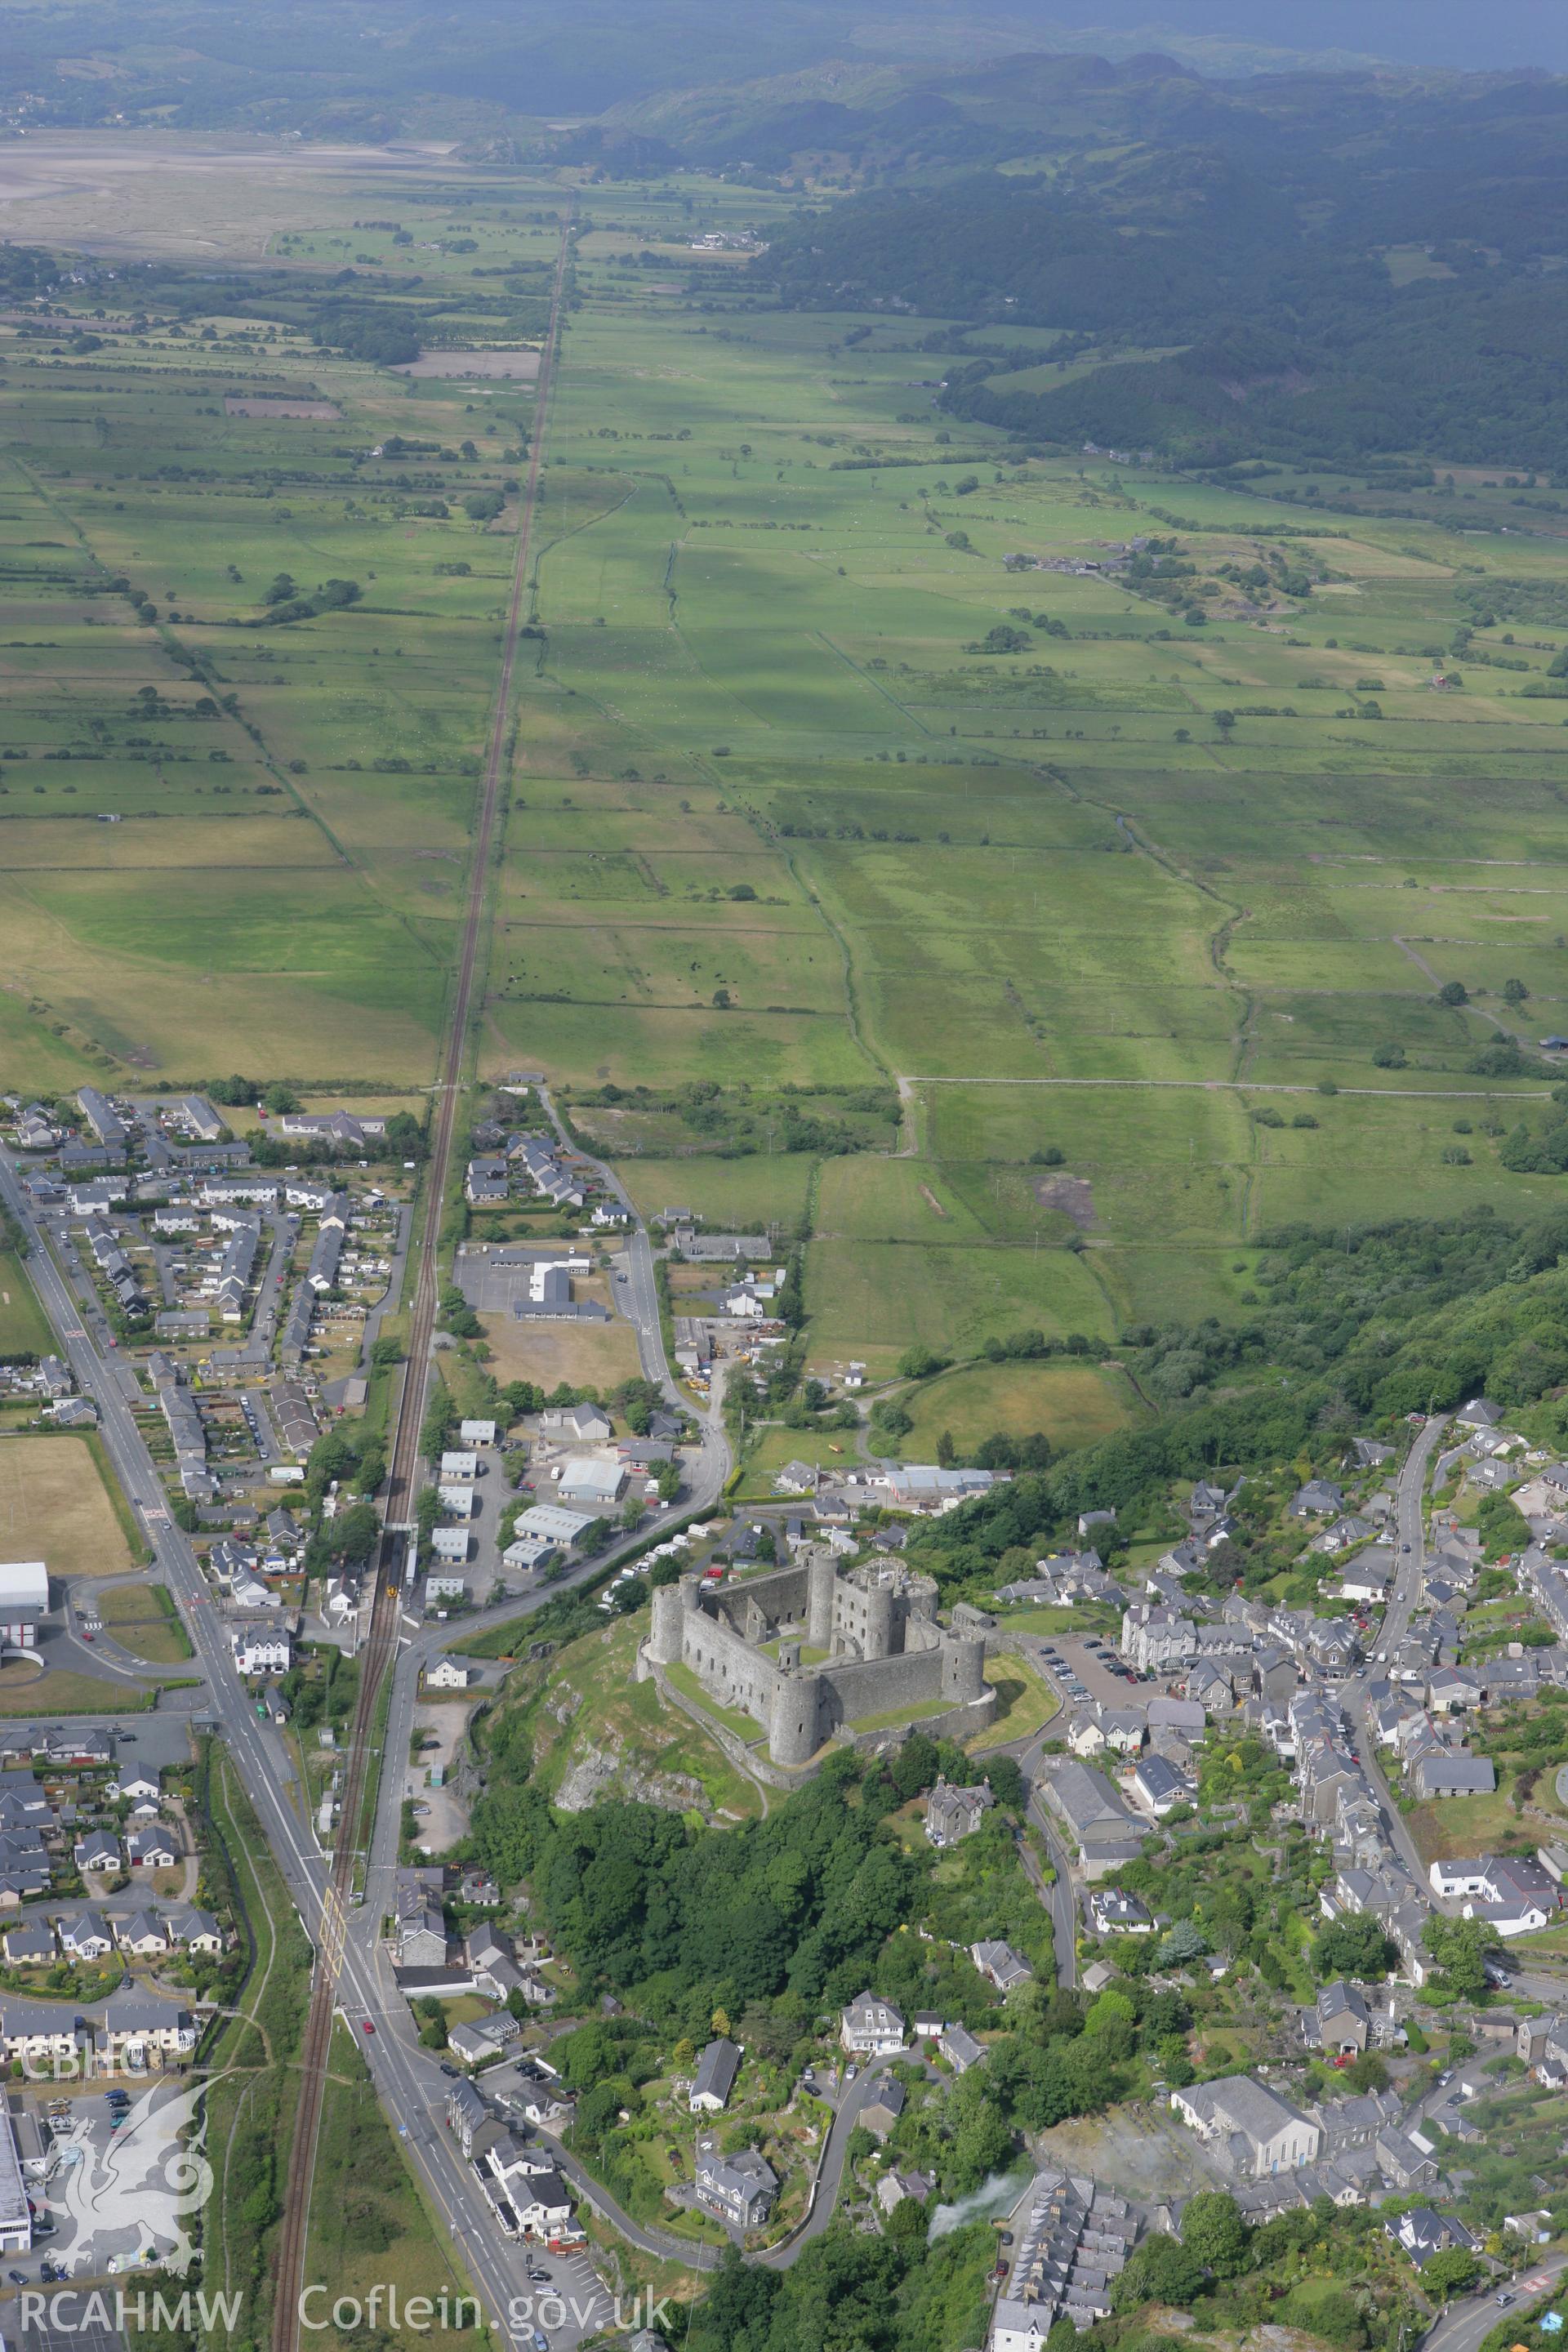 RCAHMW colour oblique photograph of Harlech Castle and town. Taken by Toby Driver on 13/06/2008.